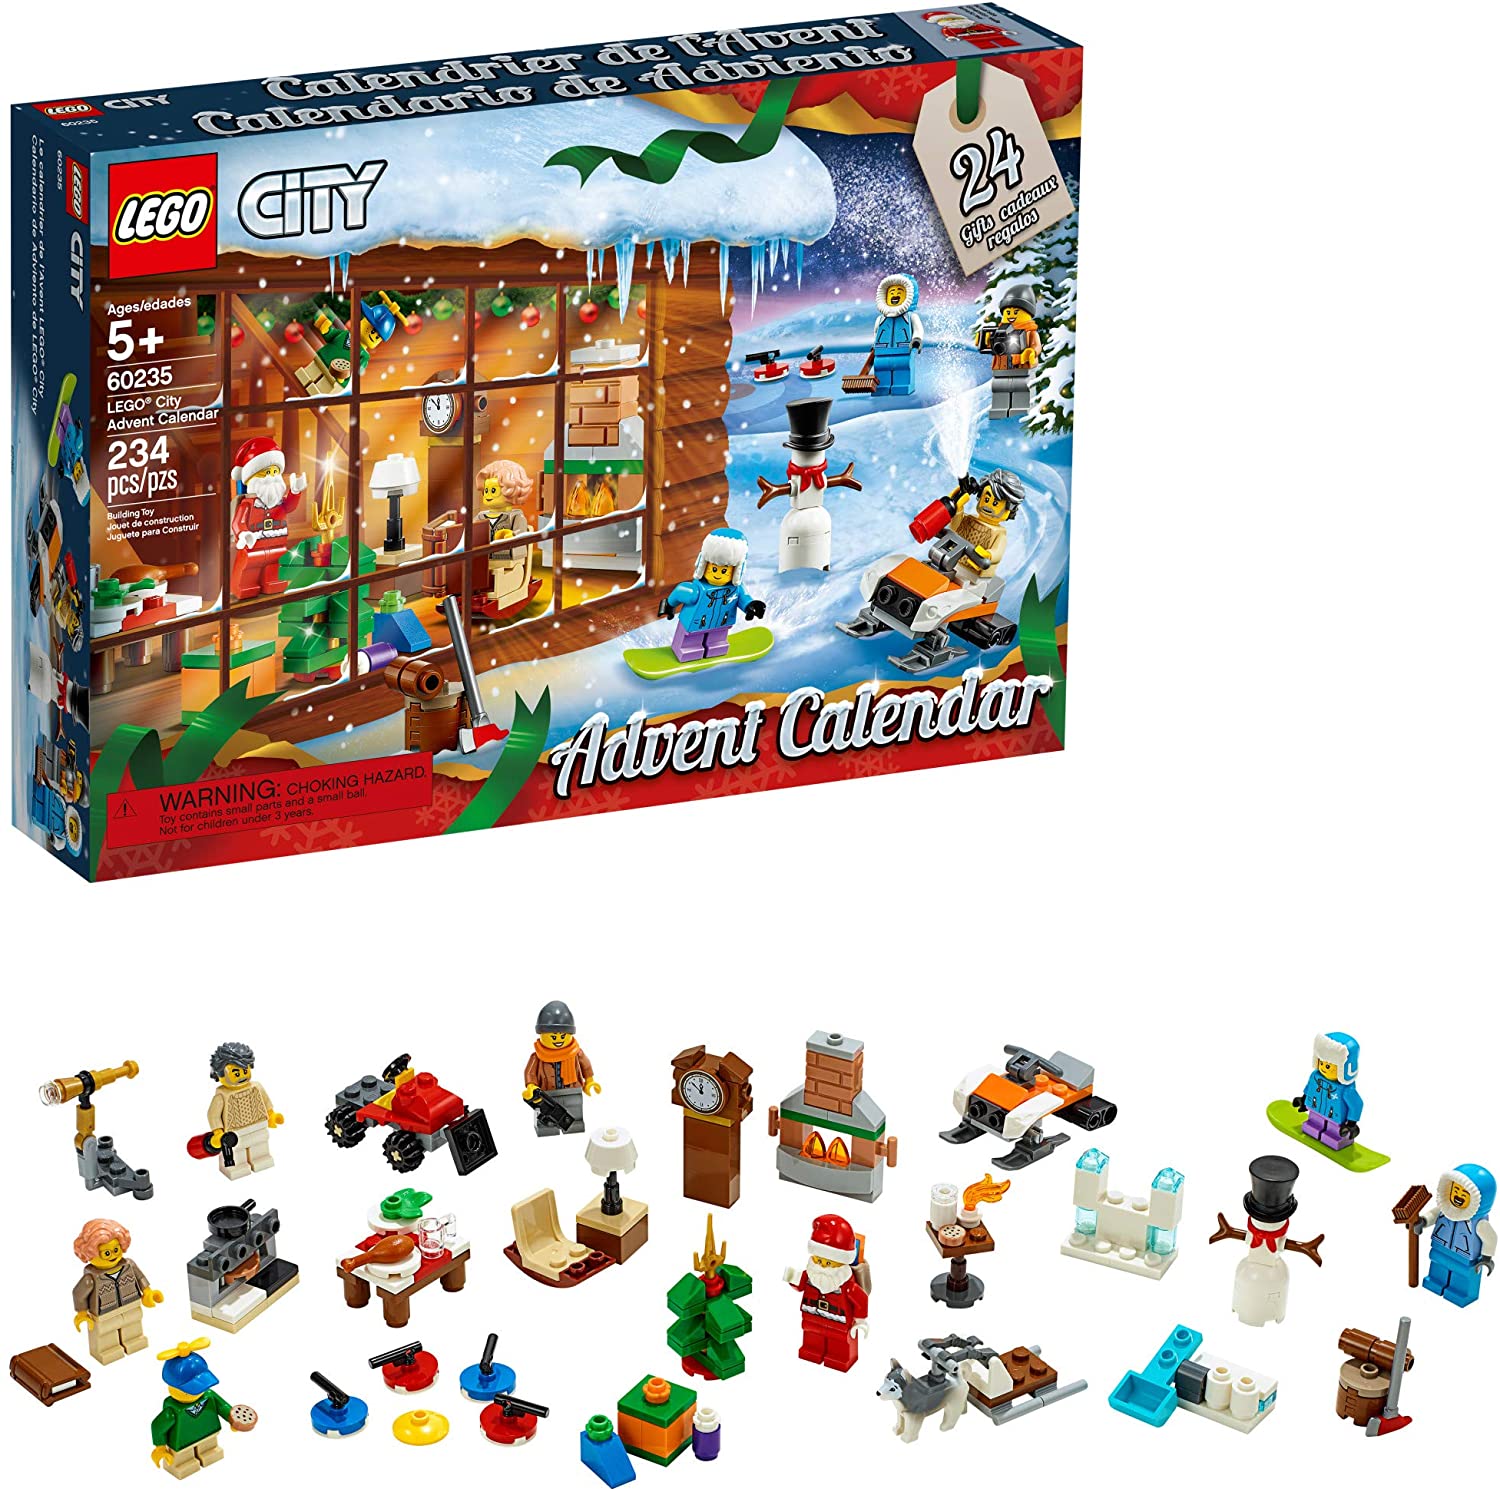 Top 9 Best LEGO Christmas Reviews in 2022 5